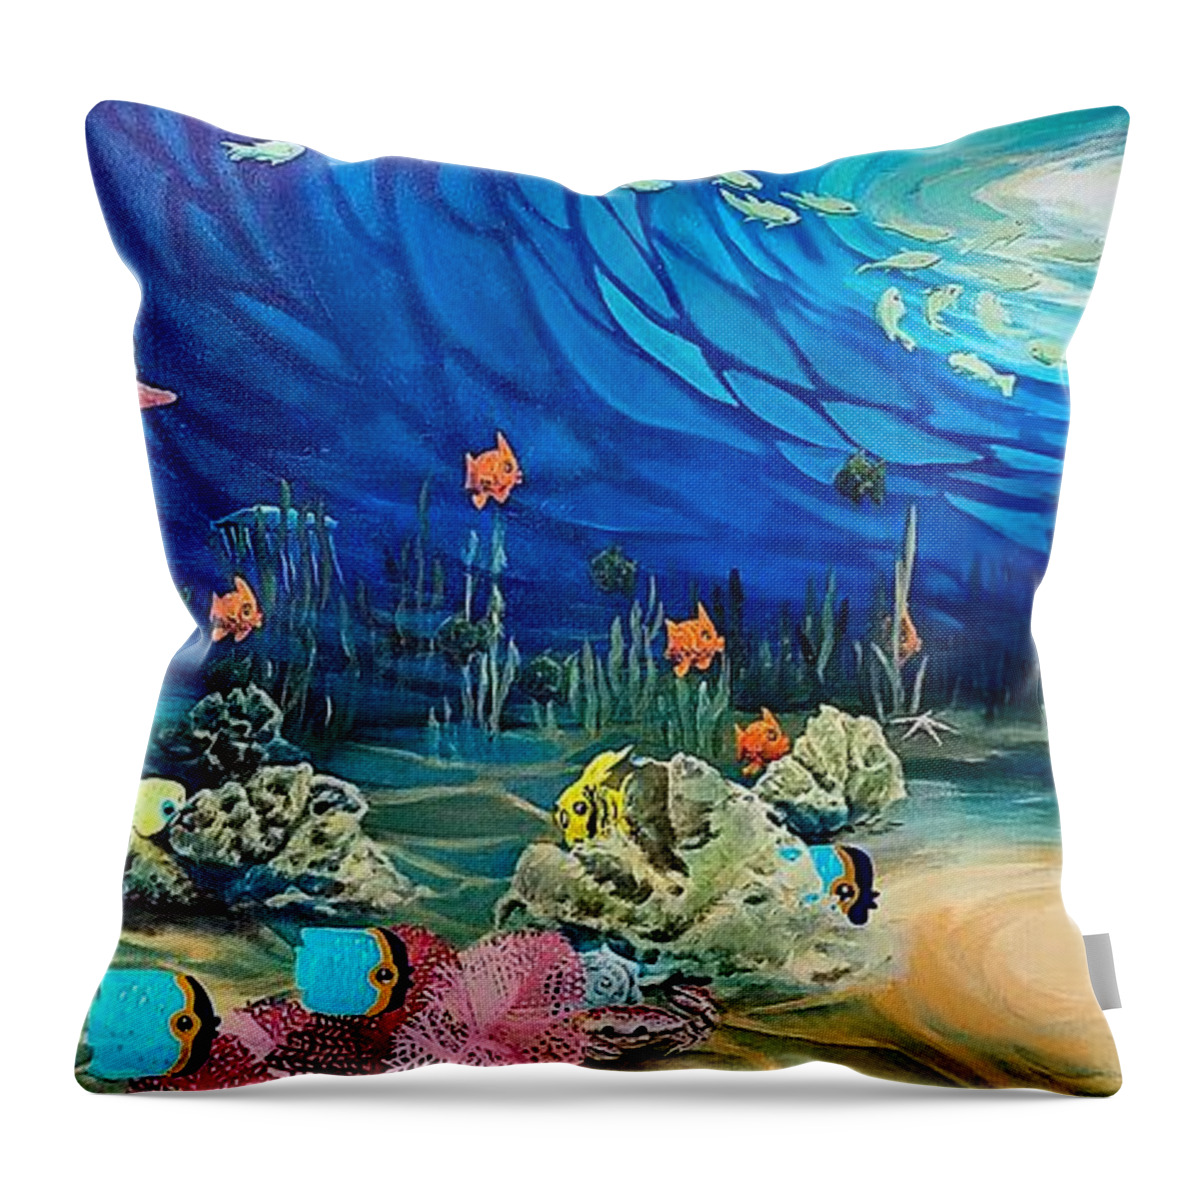 Sea Throw Pillow featuring the painting Under the Sea by Merana Cadorette